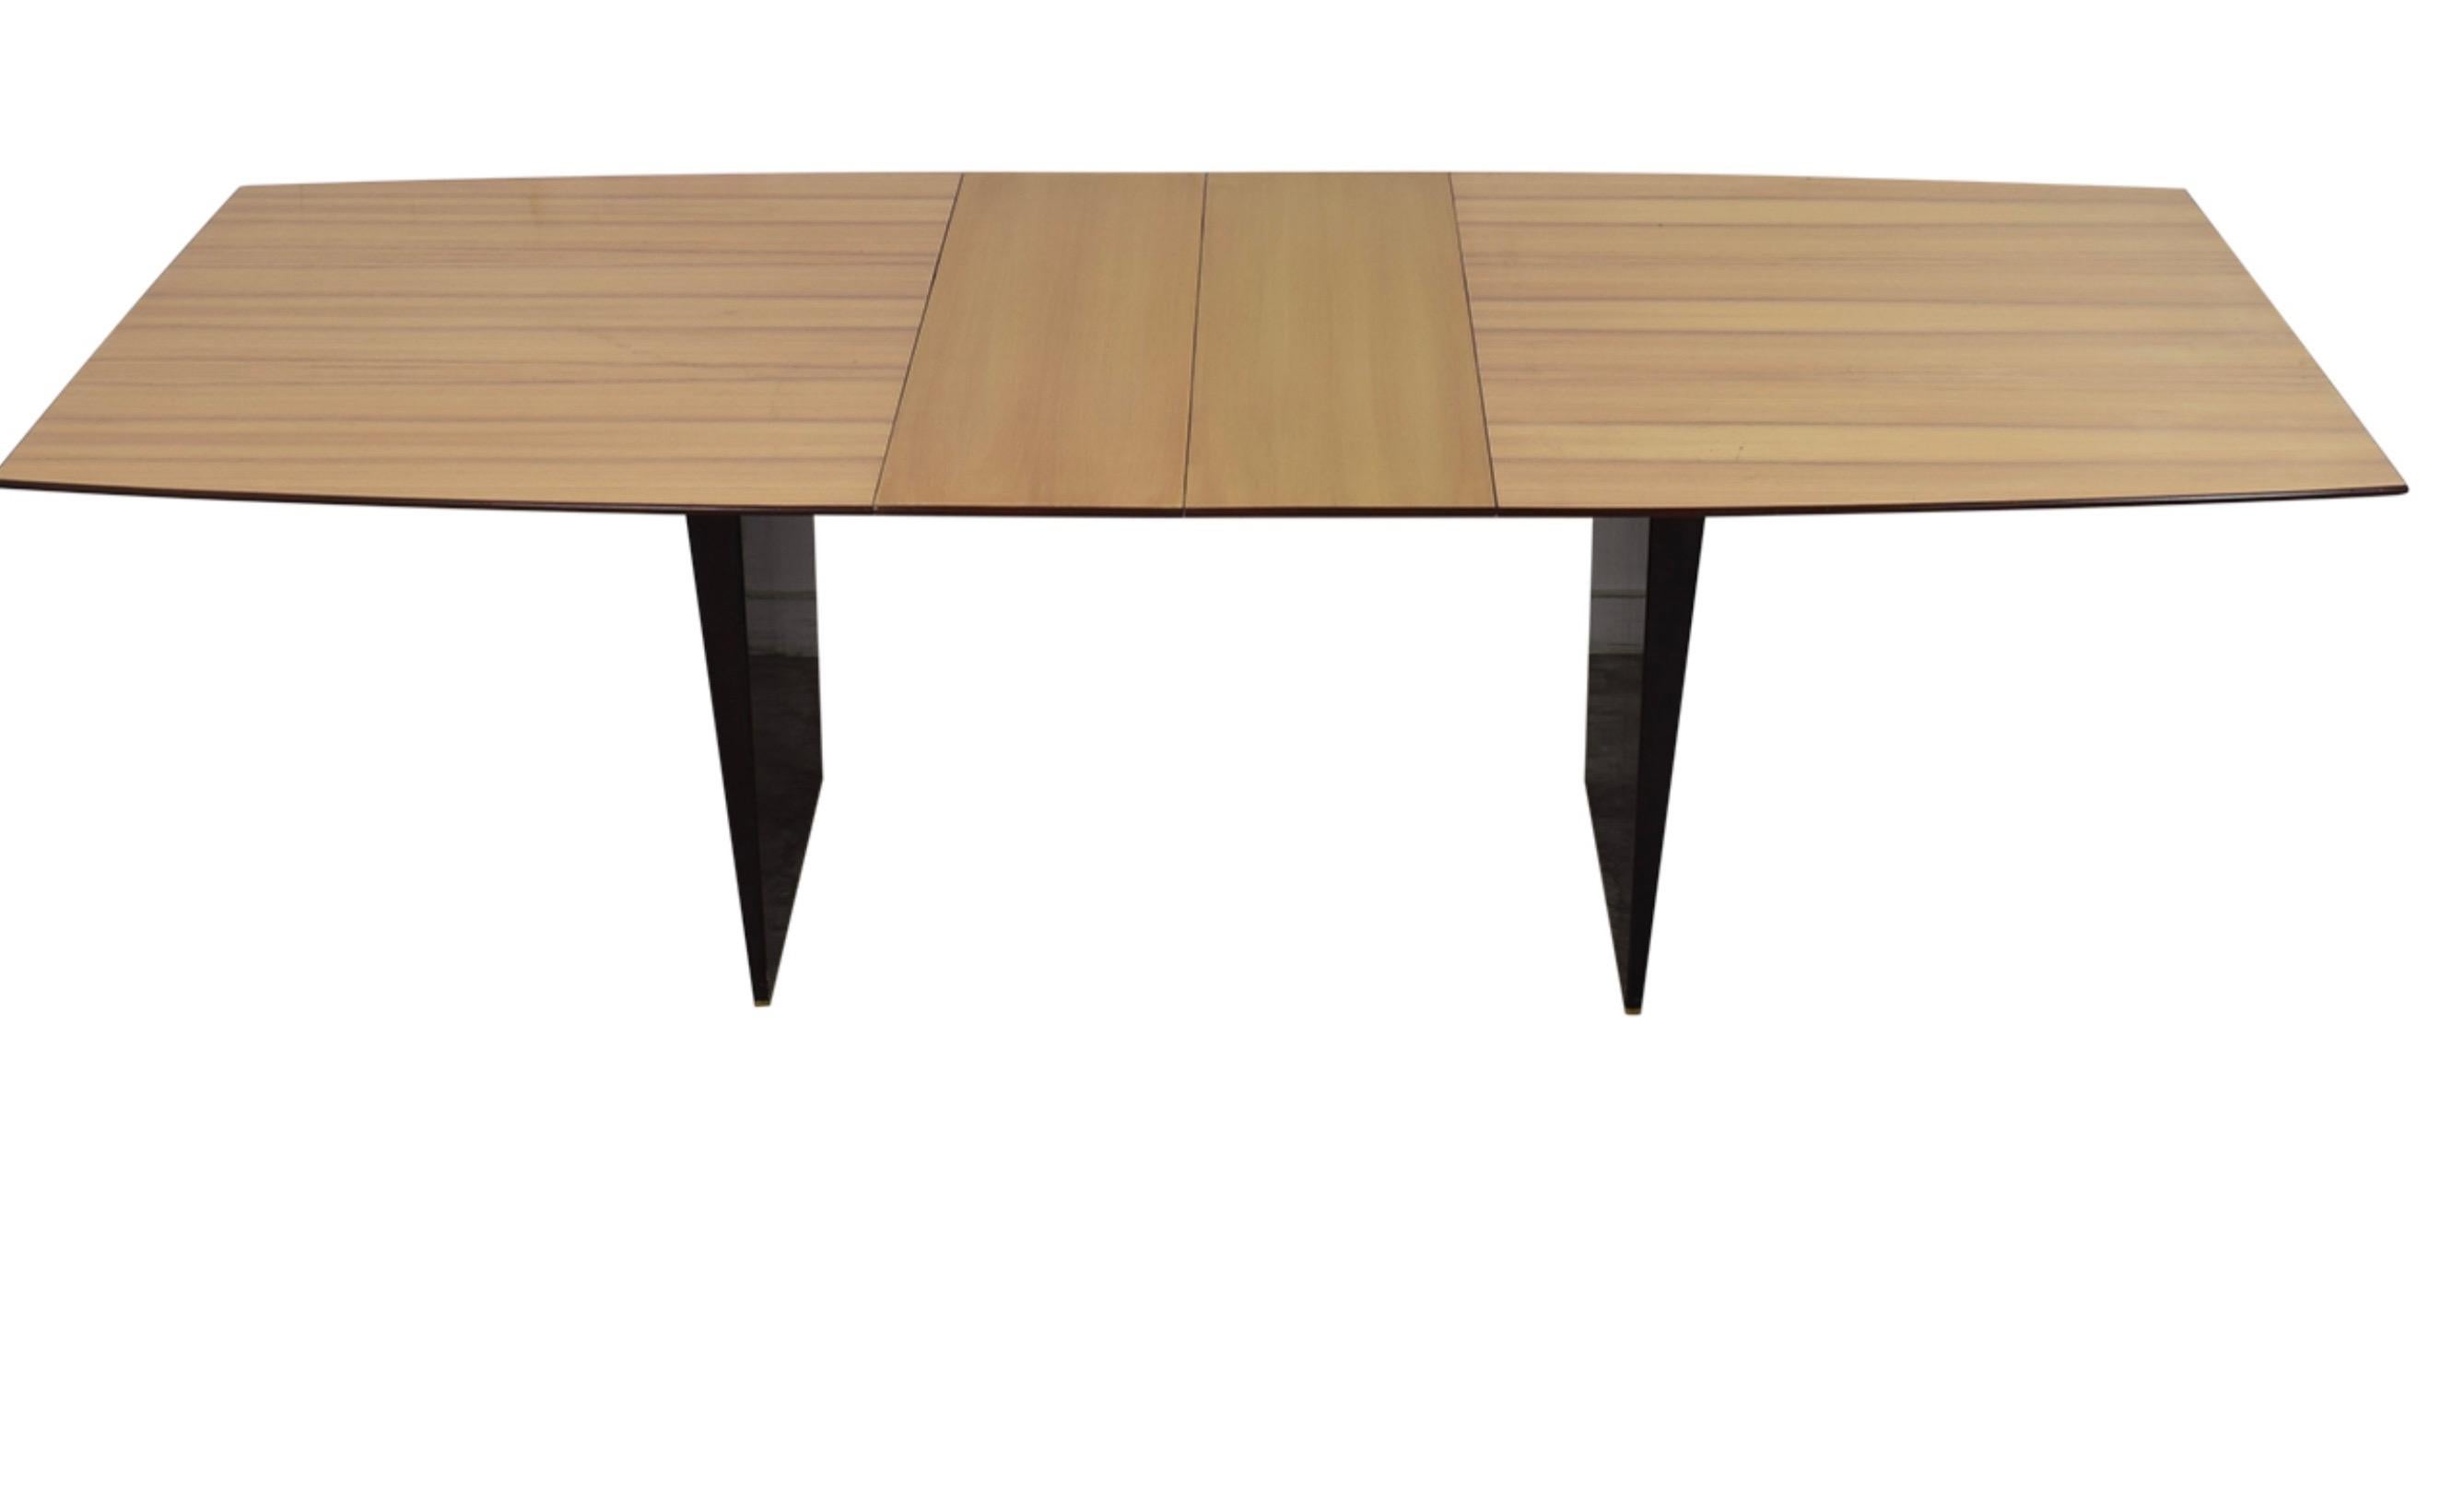 Edward Wormley Dunbar model 5460 dining table, 1954, Tawi, mahogany, brass
72 (84, 96, 108”) W × 42 D × 29 H in 
183 × 107 × 74 cm

Extremely rare piece. Original owner was very protective and used vinyl edge protection to protect original